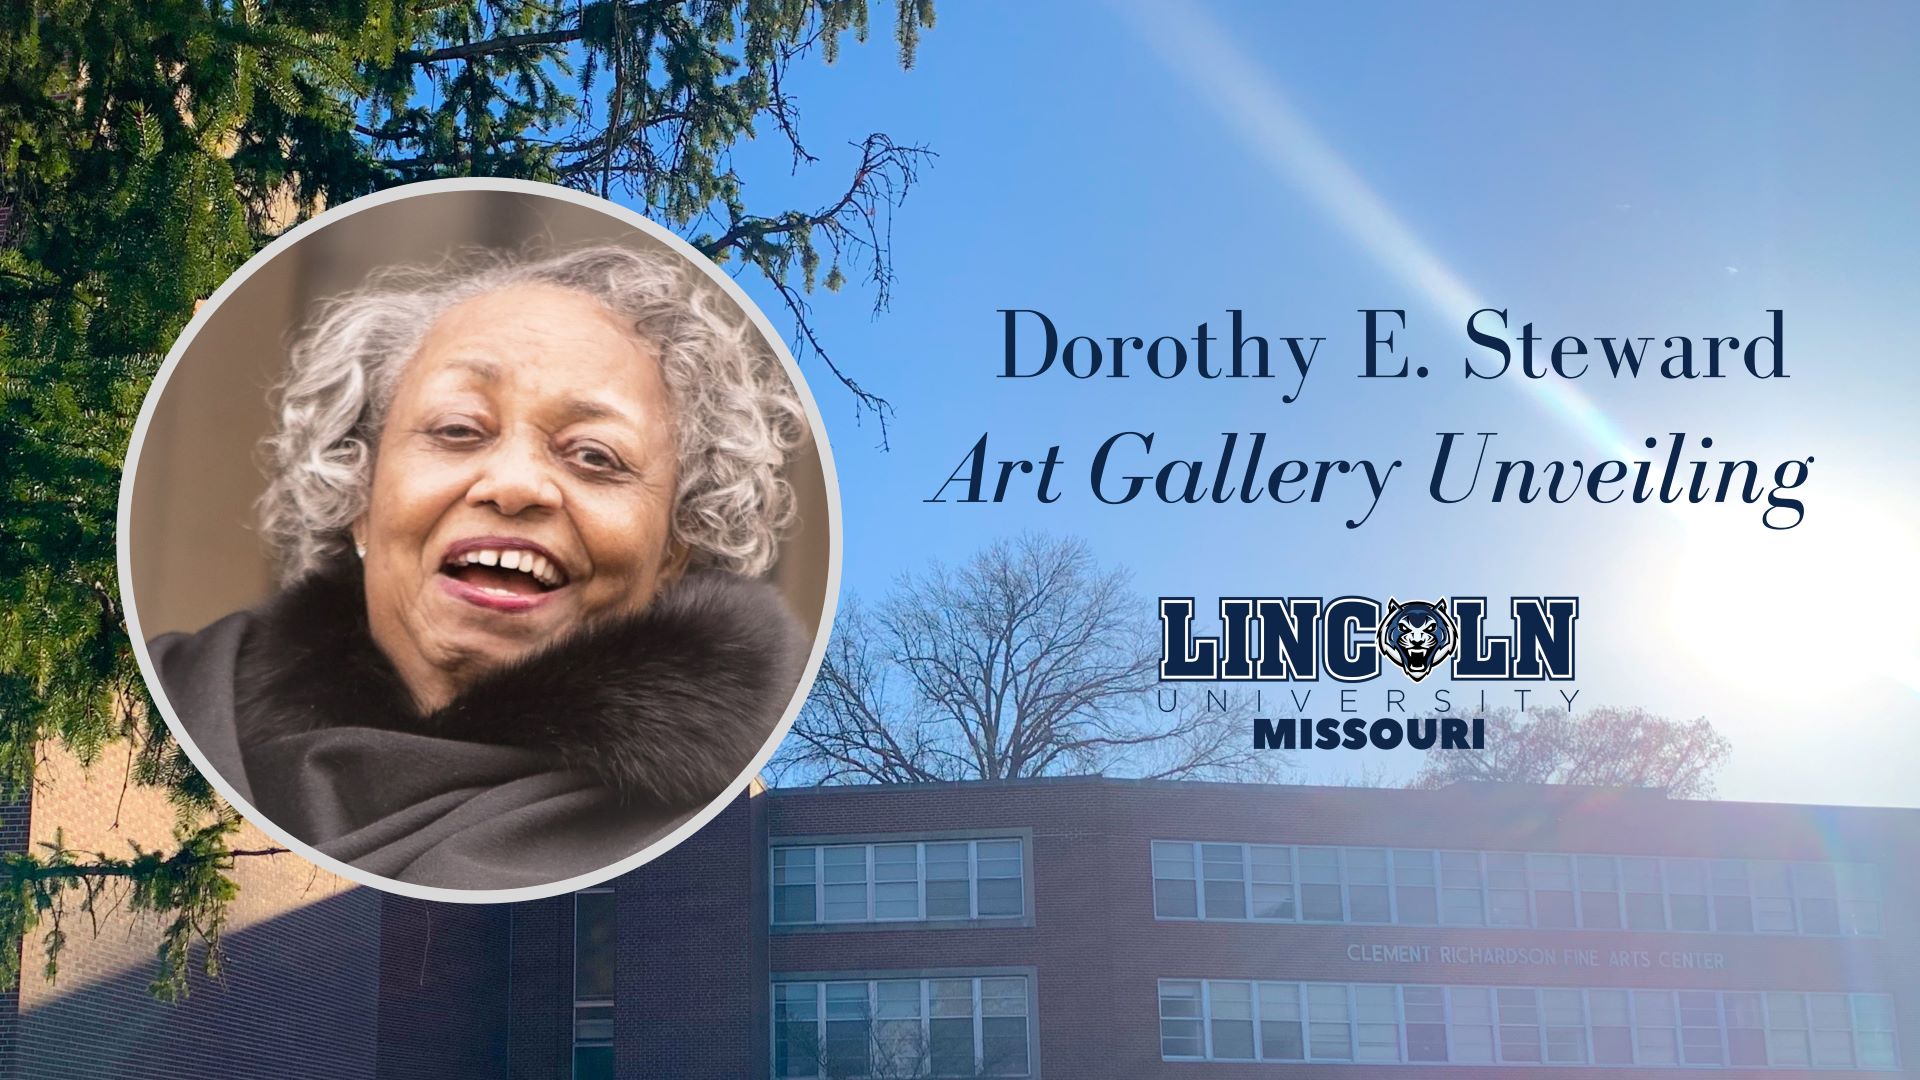 The public is invited to the unveiling of the Dorothy E. Steward Art Gallery on March 10, 2023.